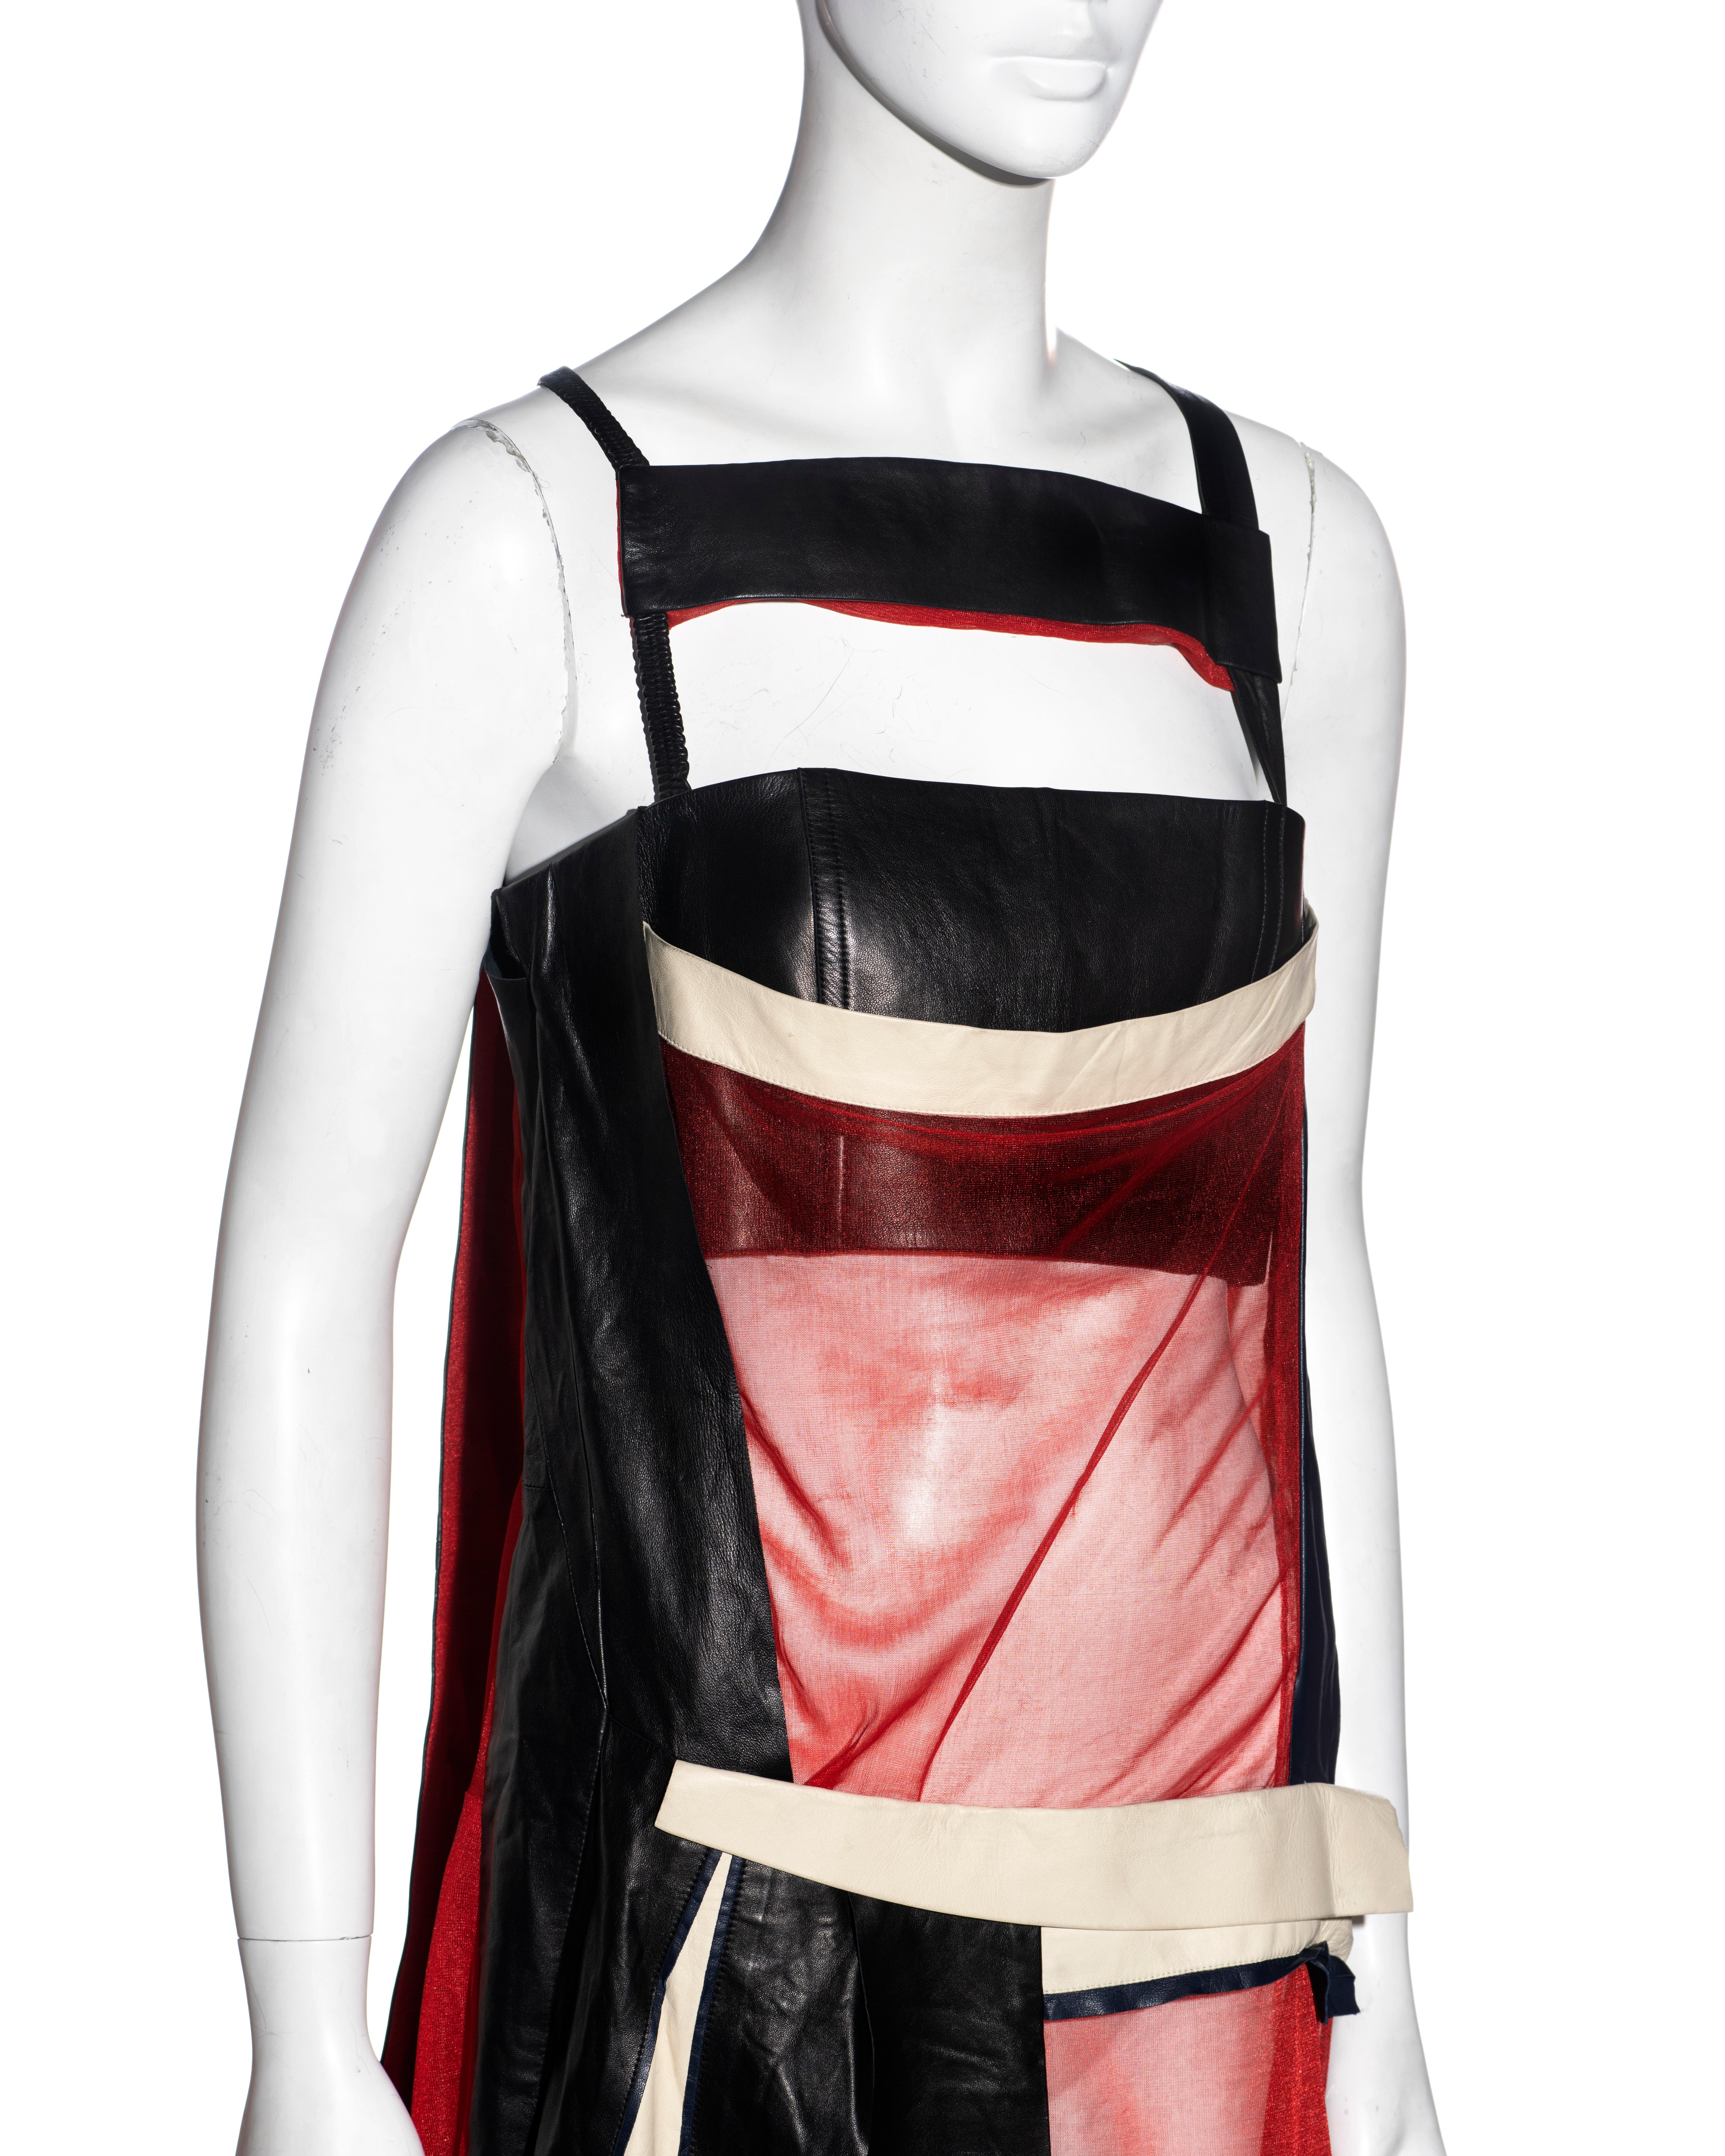 Women's Balenciaga by Nicolas Ghesquière black and red leather mini dress, ss 2010 For Sale